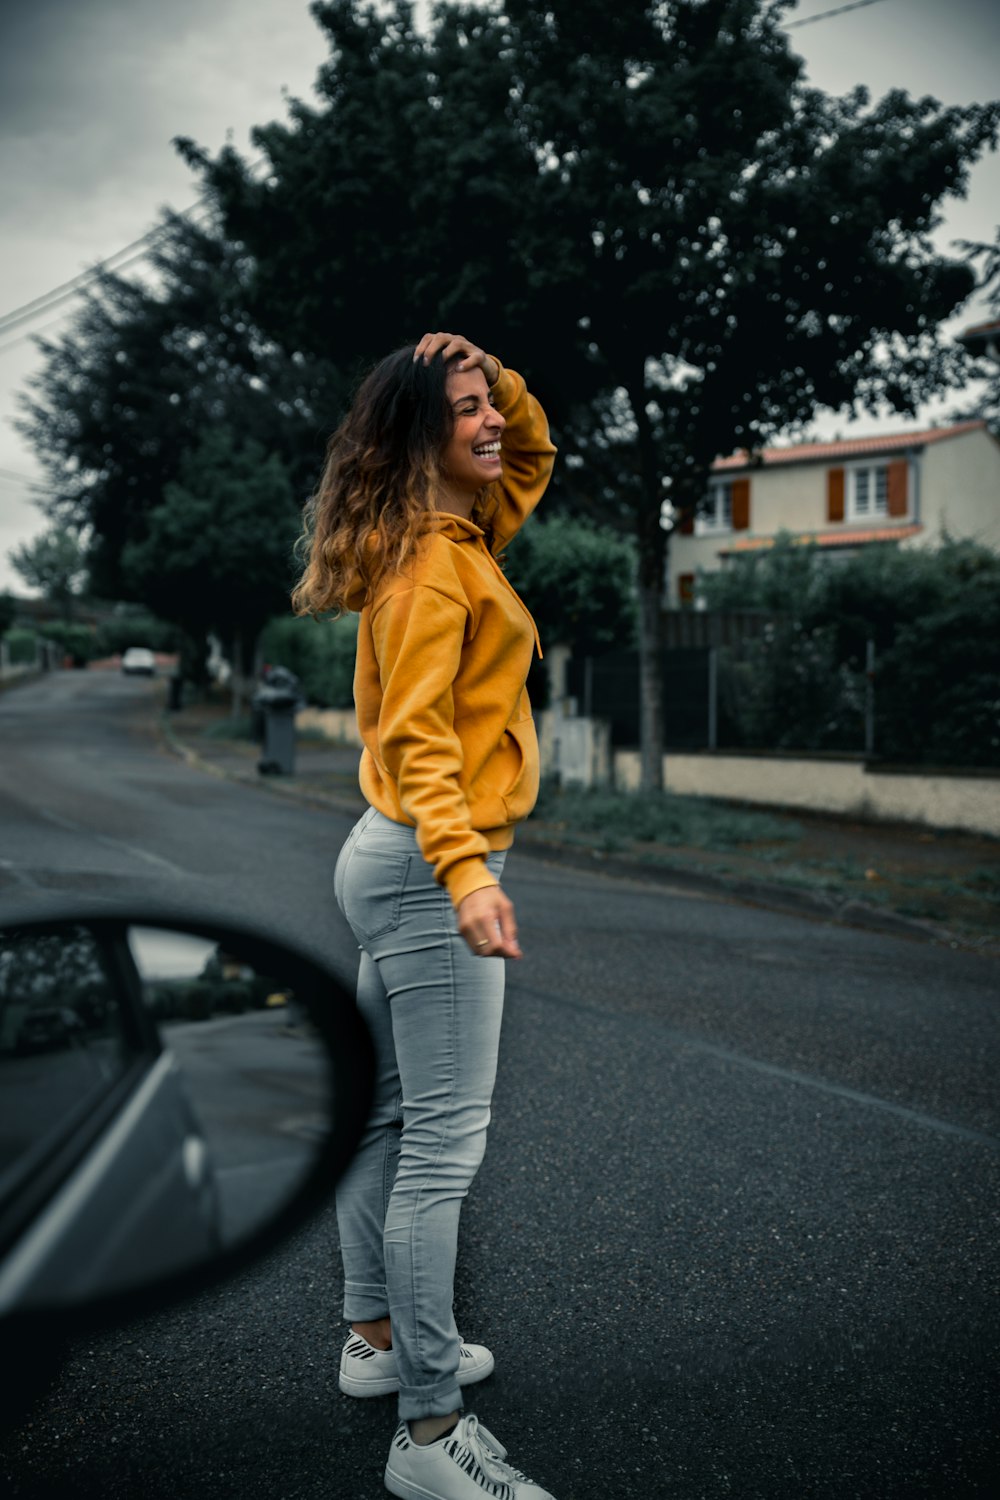 woman in yellow hoodie and gray pants standing on road during daytime photo  – Free France Image on Unsplash